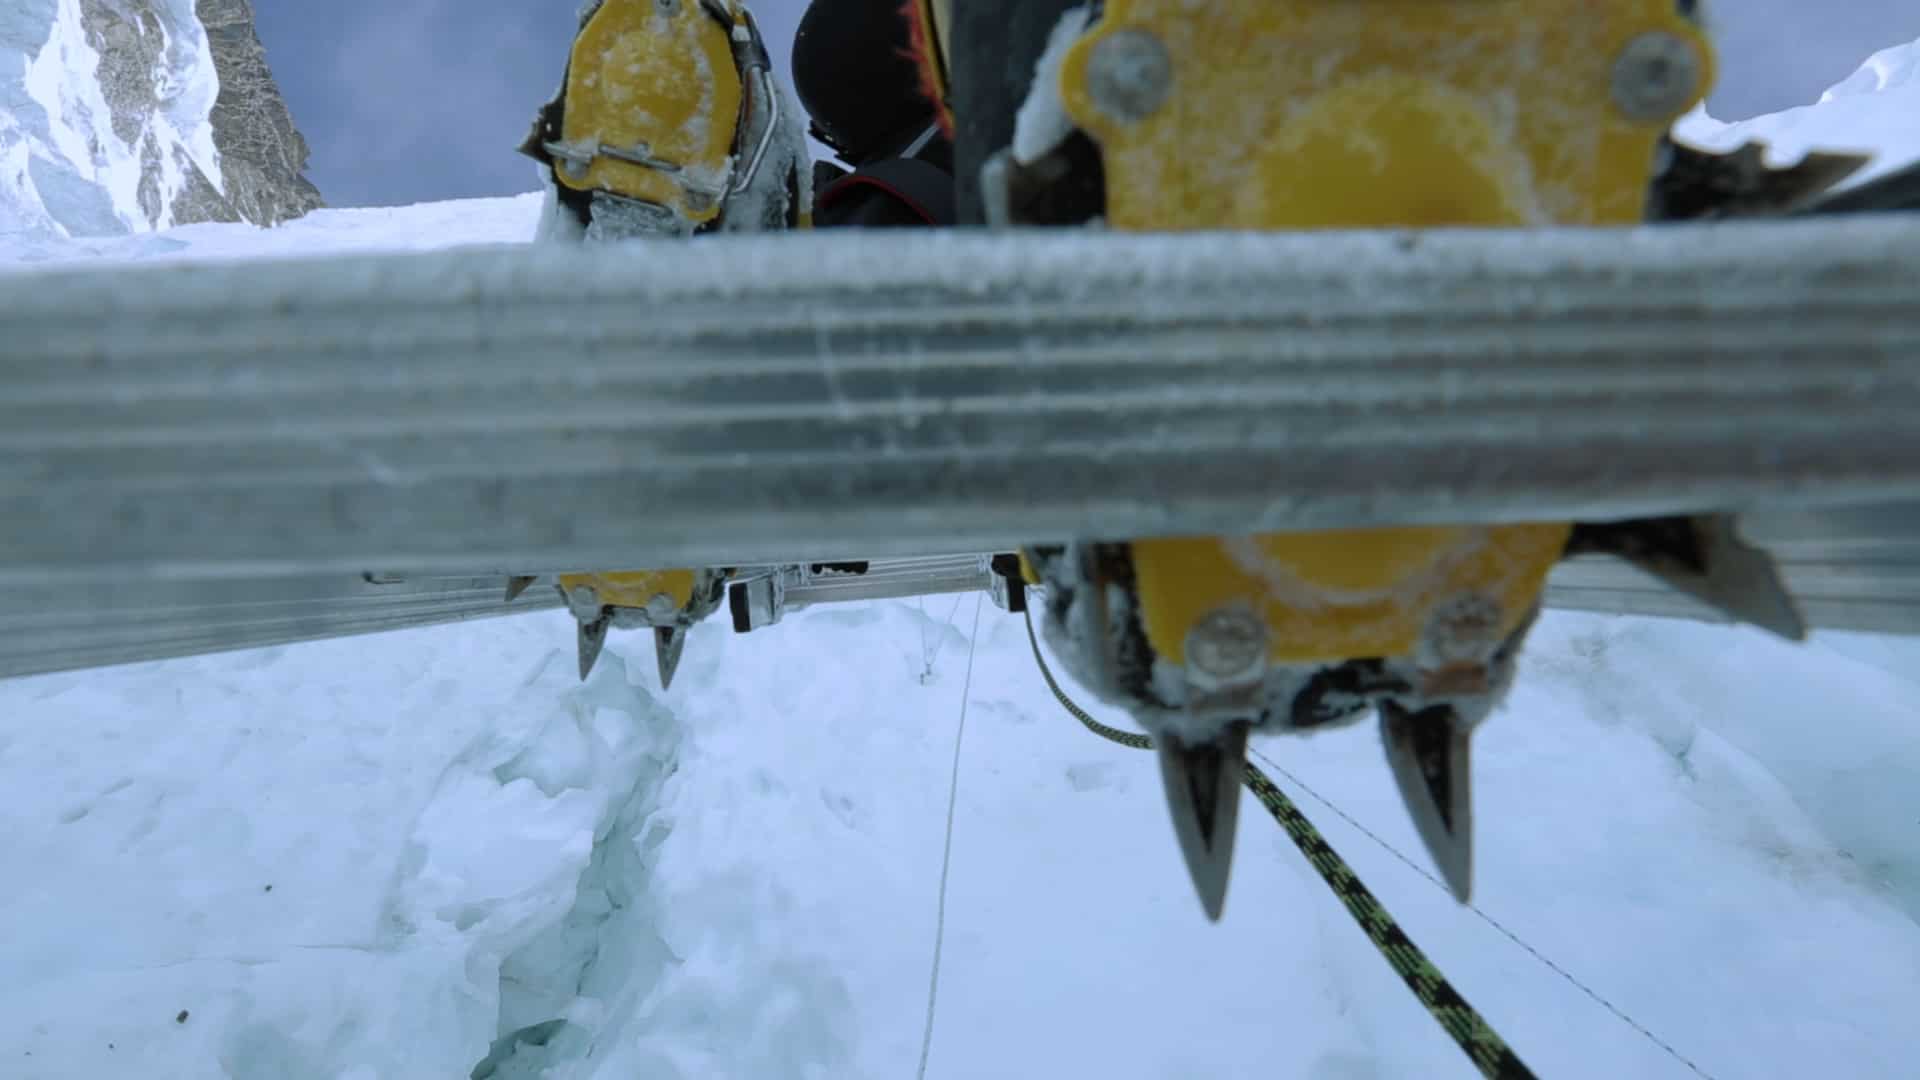 Sherpa descending a ladder on Everest in the Khumbu Icefall with unique